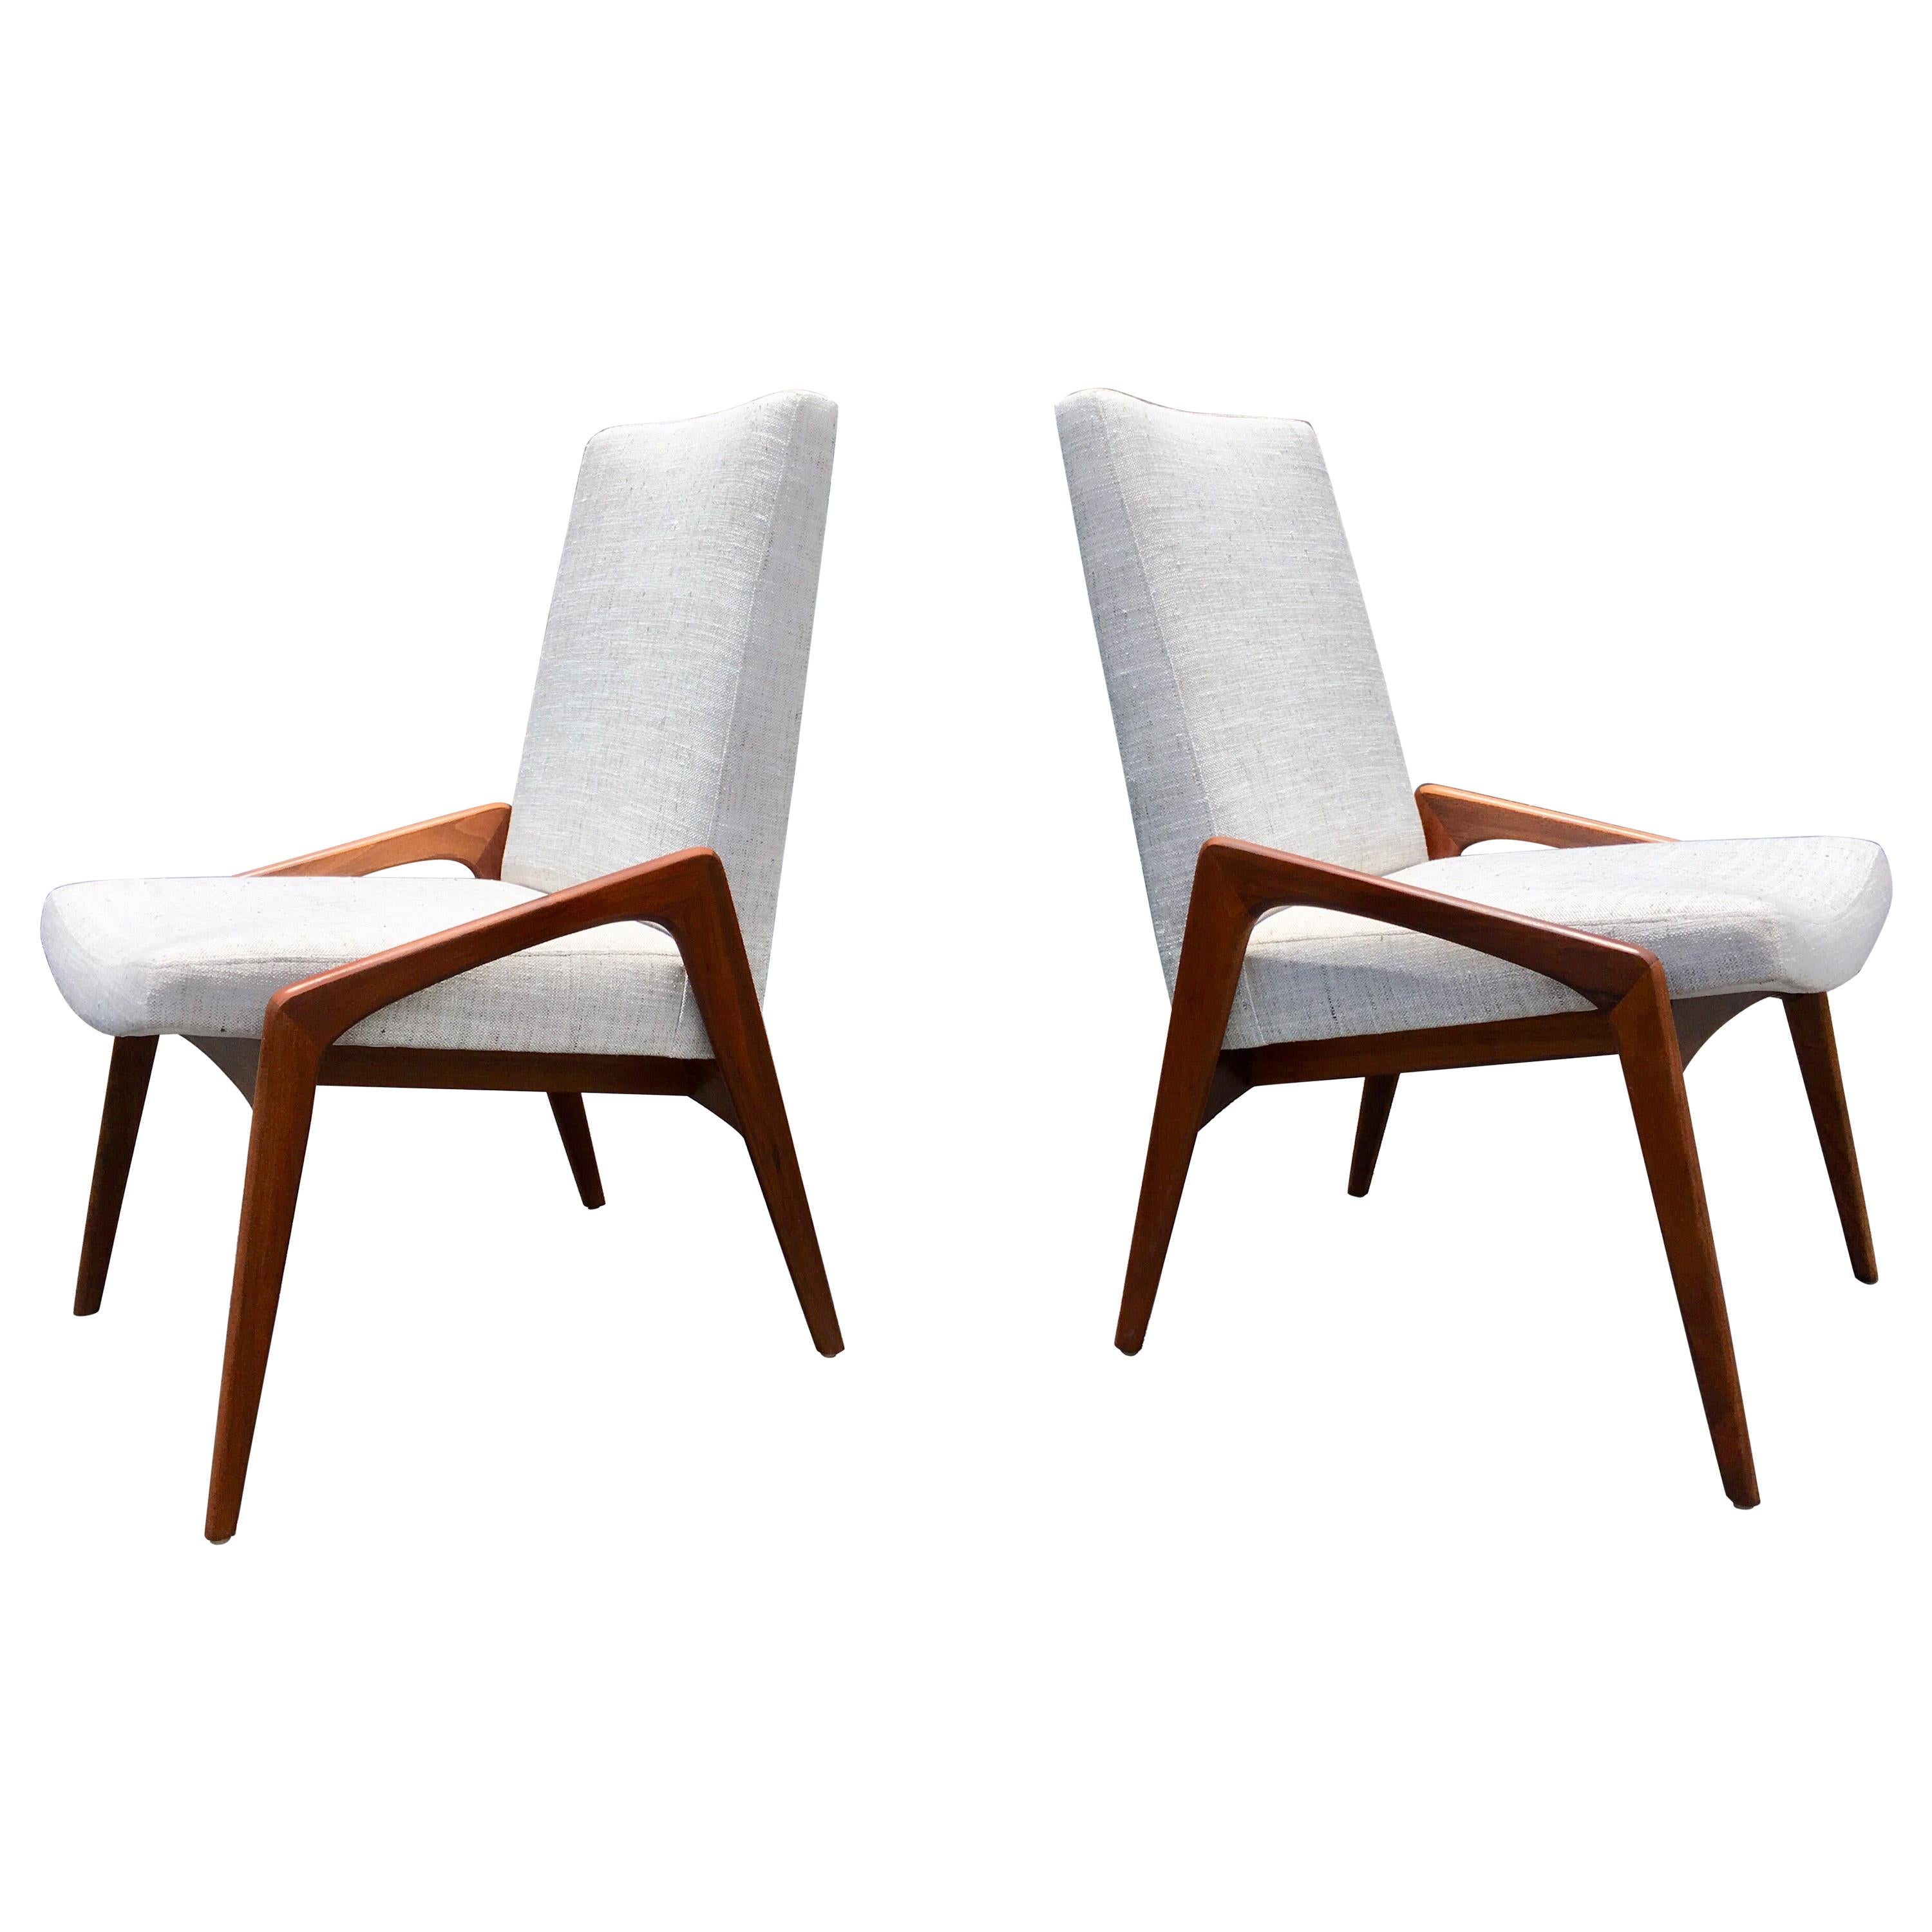 Beautiful pair of Mid-Century Modern chairs, very much in the style of Gio Ponti. Excellent condition, four chairs available.